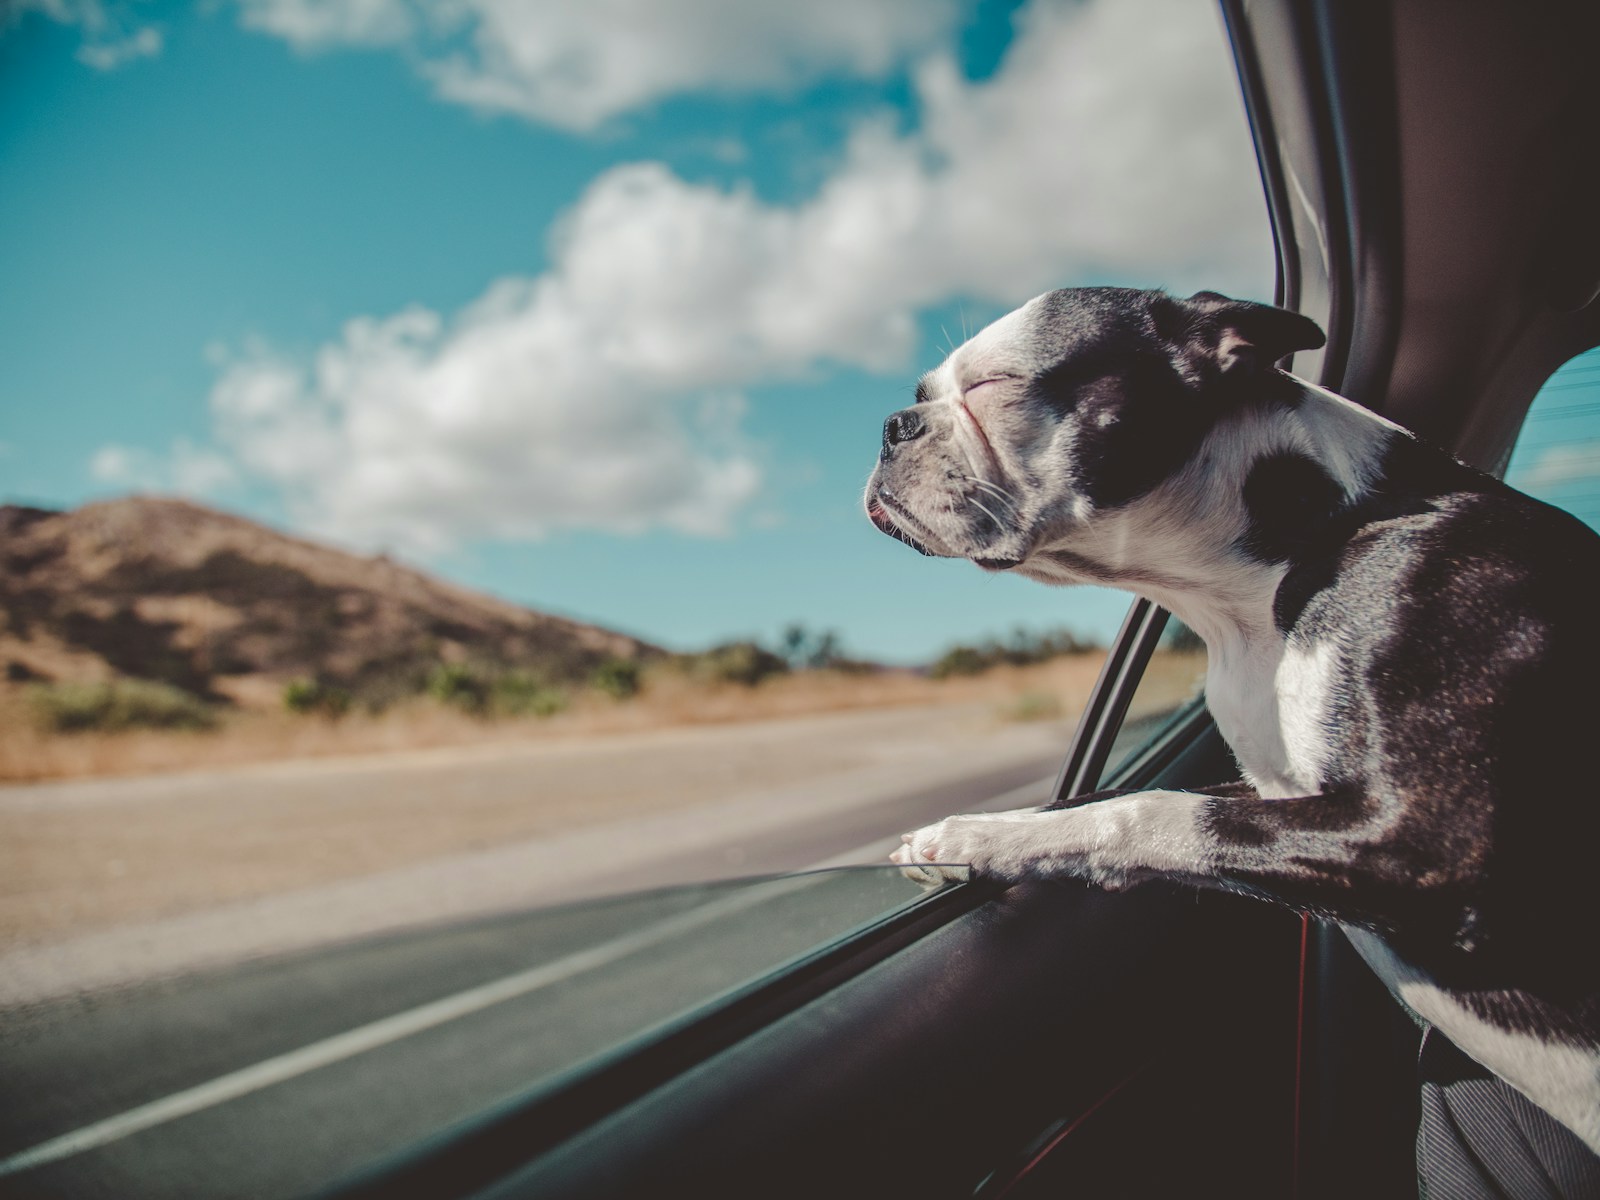 Dog-Friendly Destinations: Best Places to Visit with Your Pup